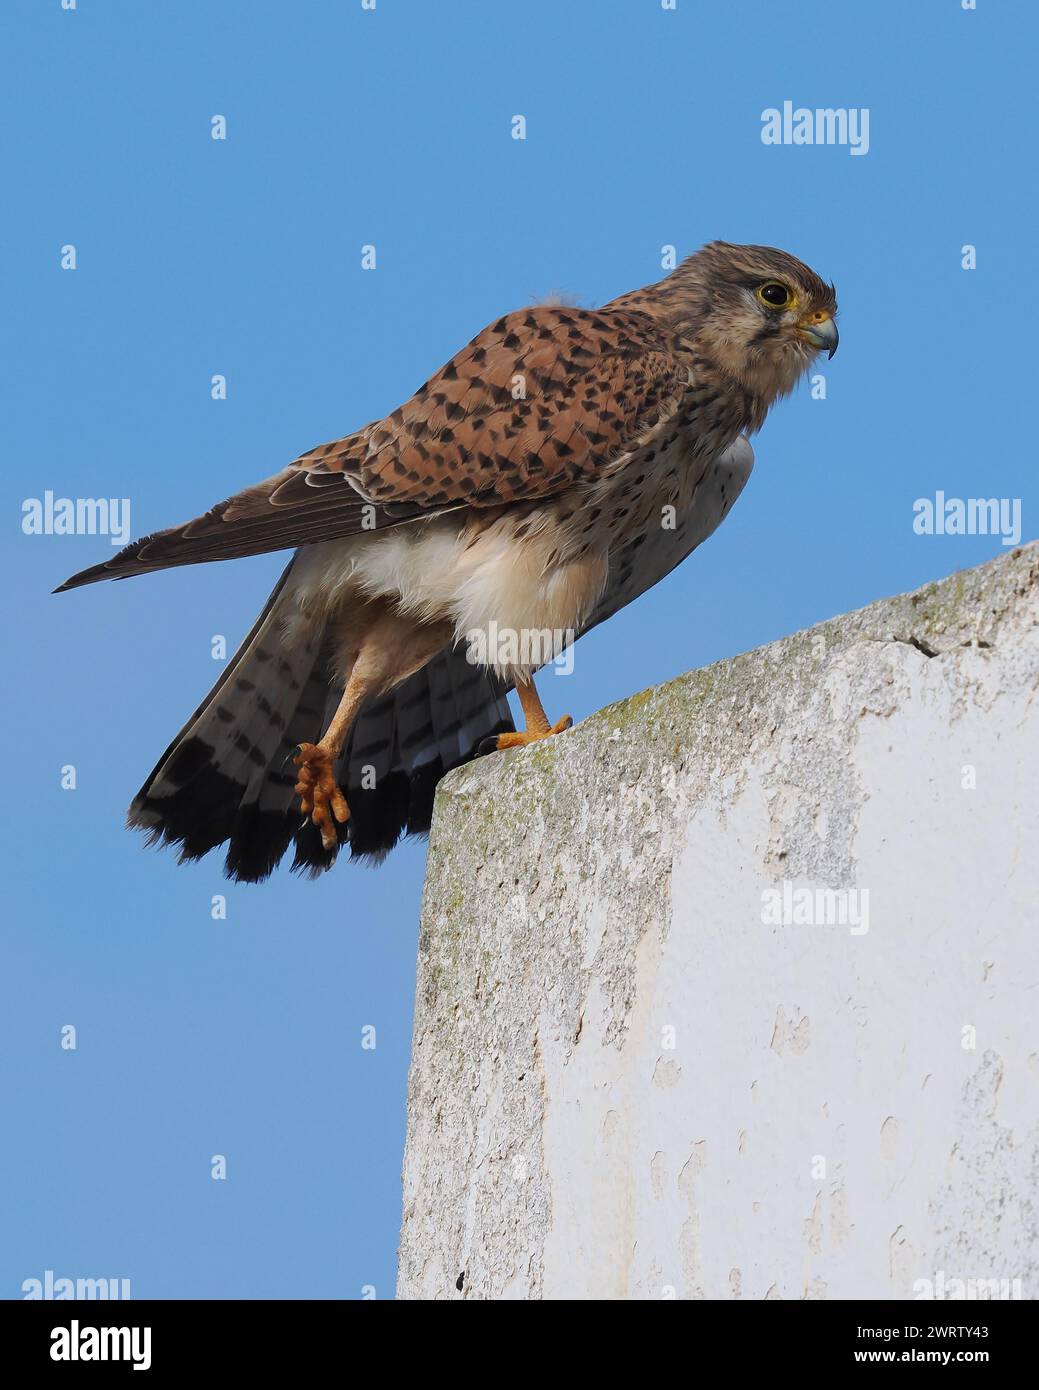 Kestrels are found throughout the western palearctic,  these images taken on Lanzarote. Stock Photo